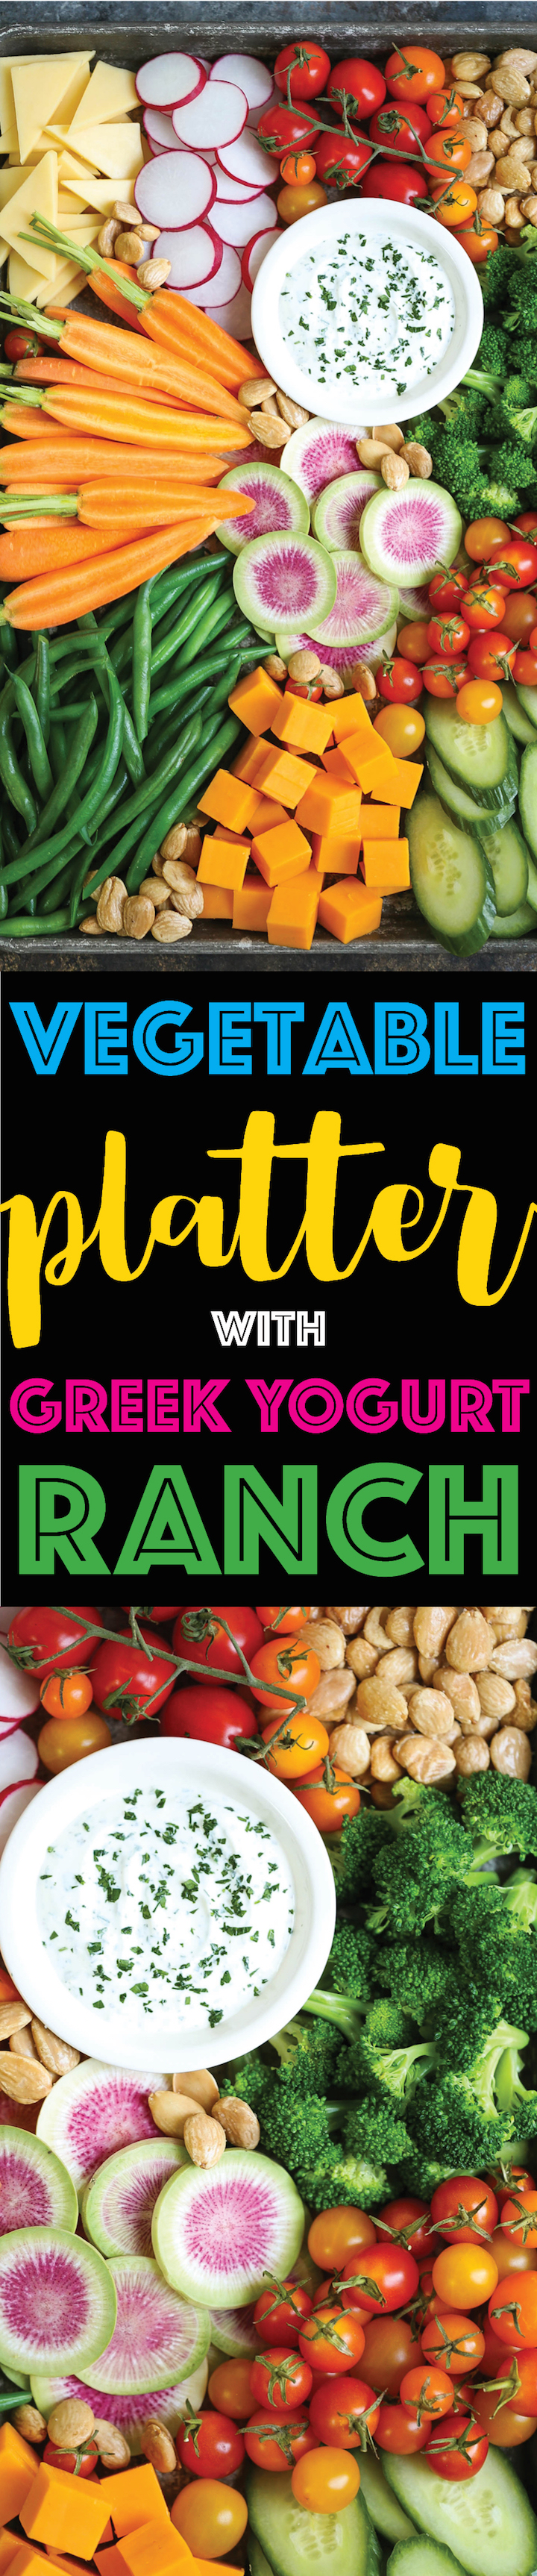 ​Vegetable Platter with Greek Yogurt Ranch - The ultimate crudités platter with a healthy Greek yogurt Ranch! You cannot even taste the difference!